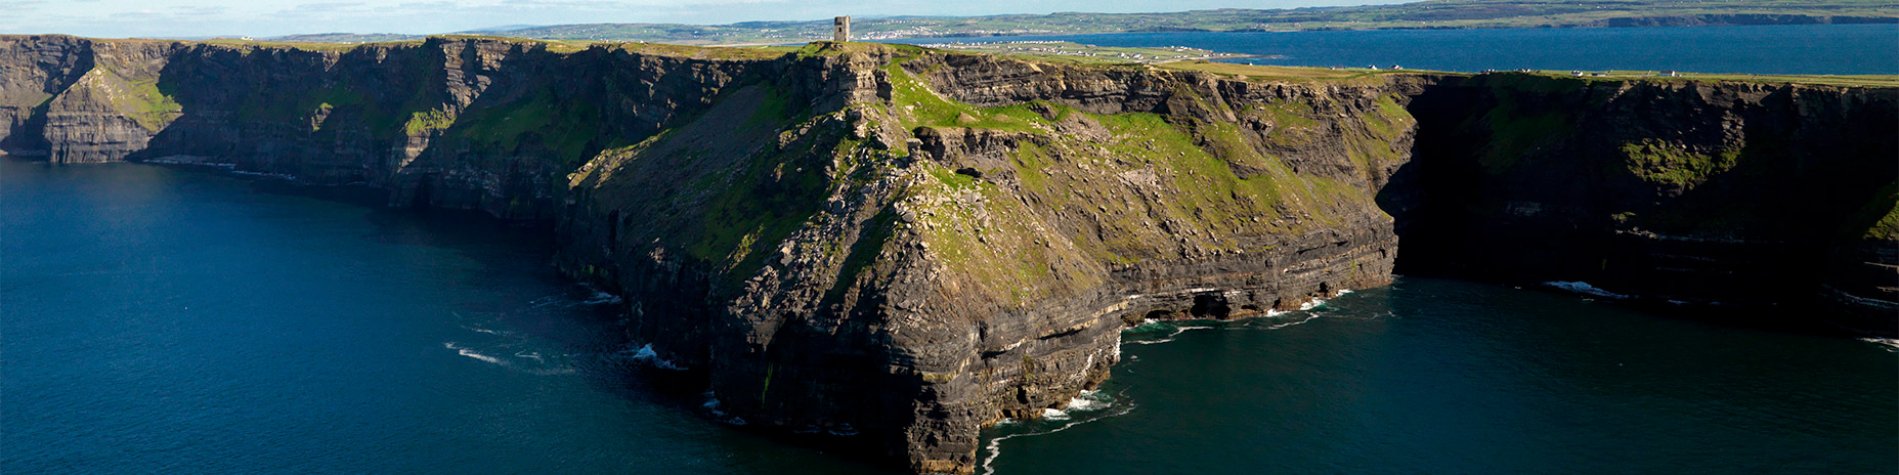 Ireland's Great Natural Landmarks - The Cliffs of Moher